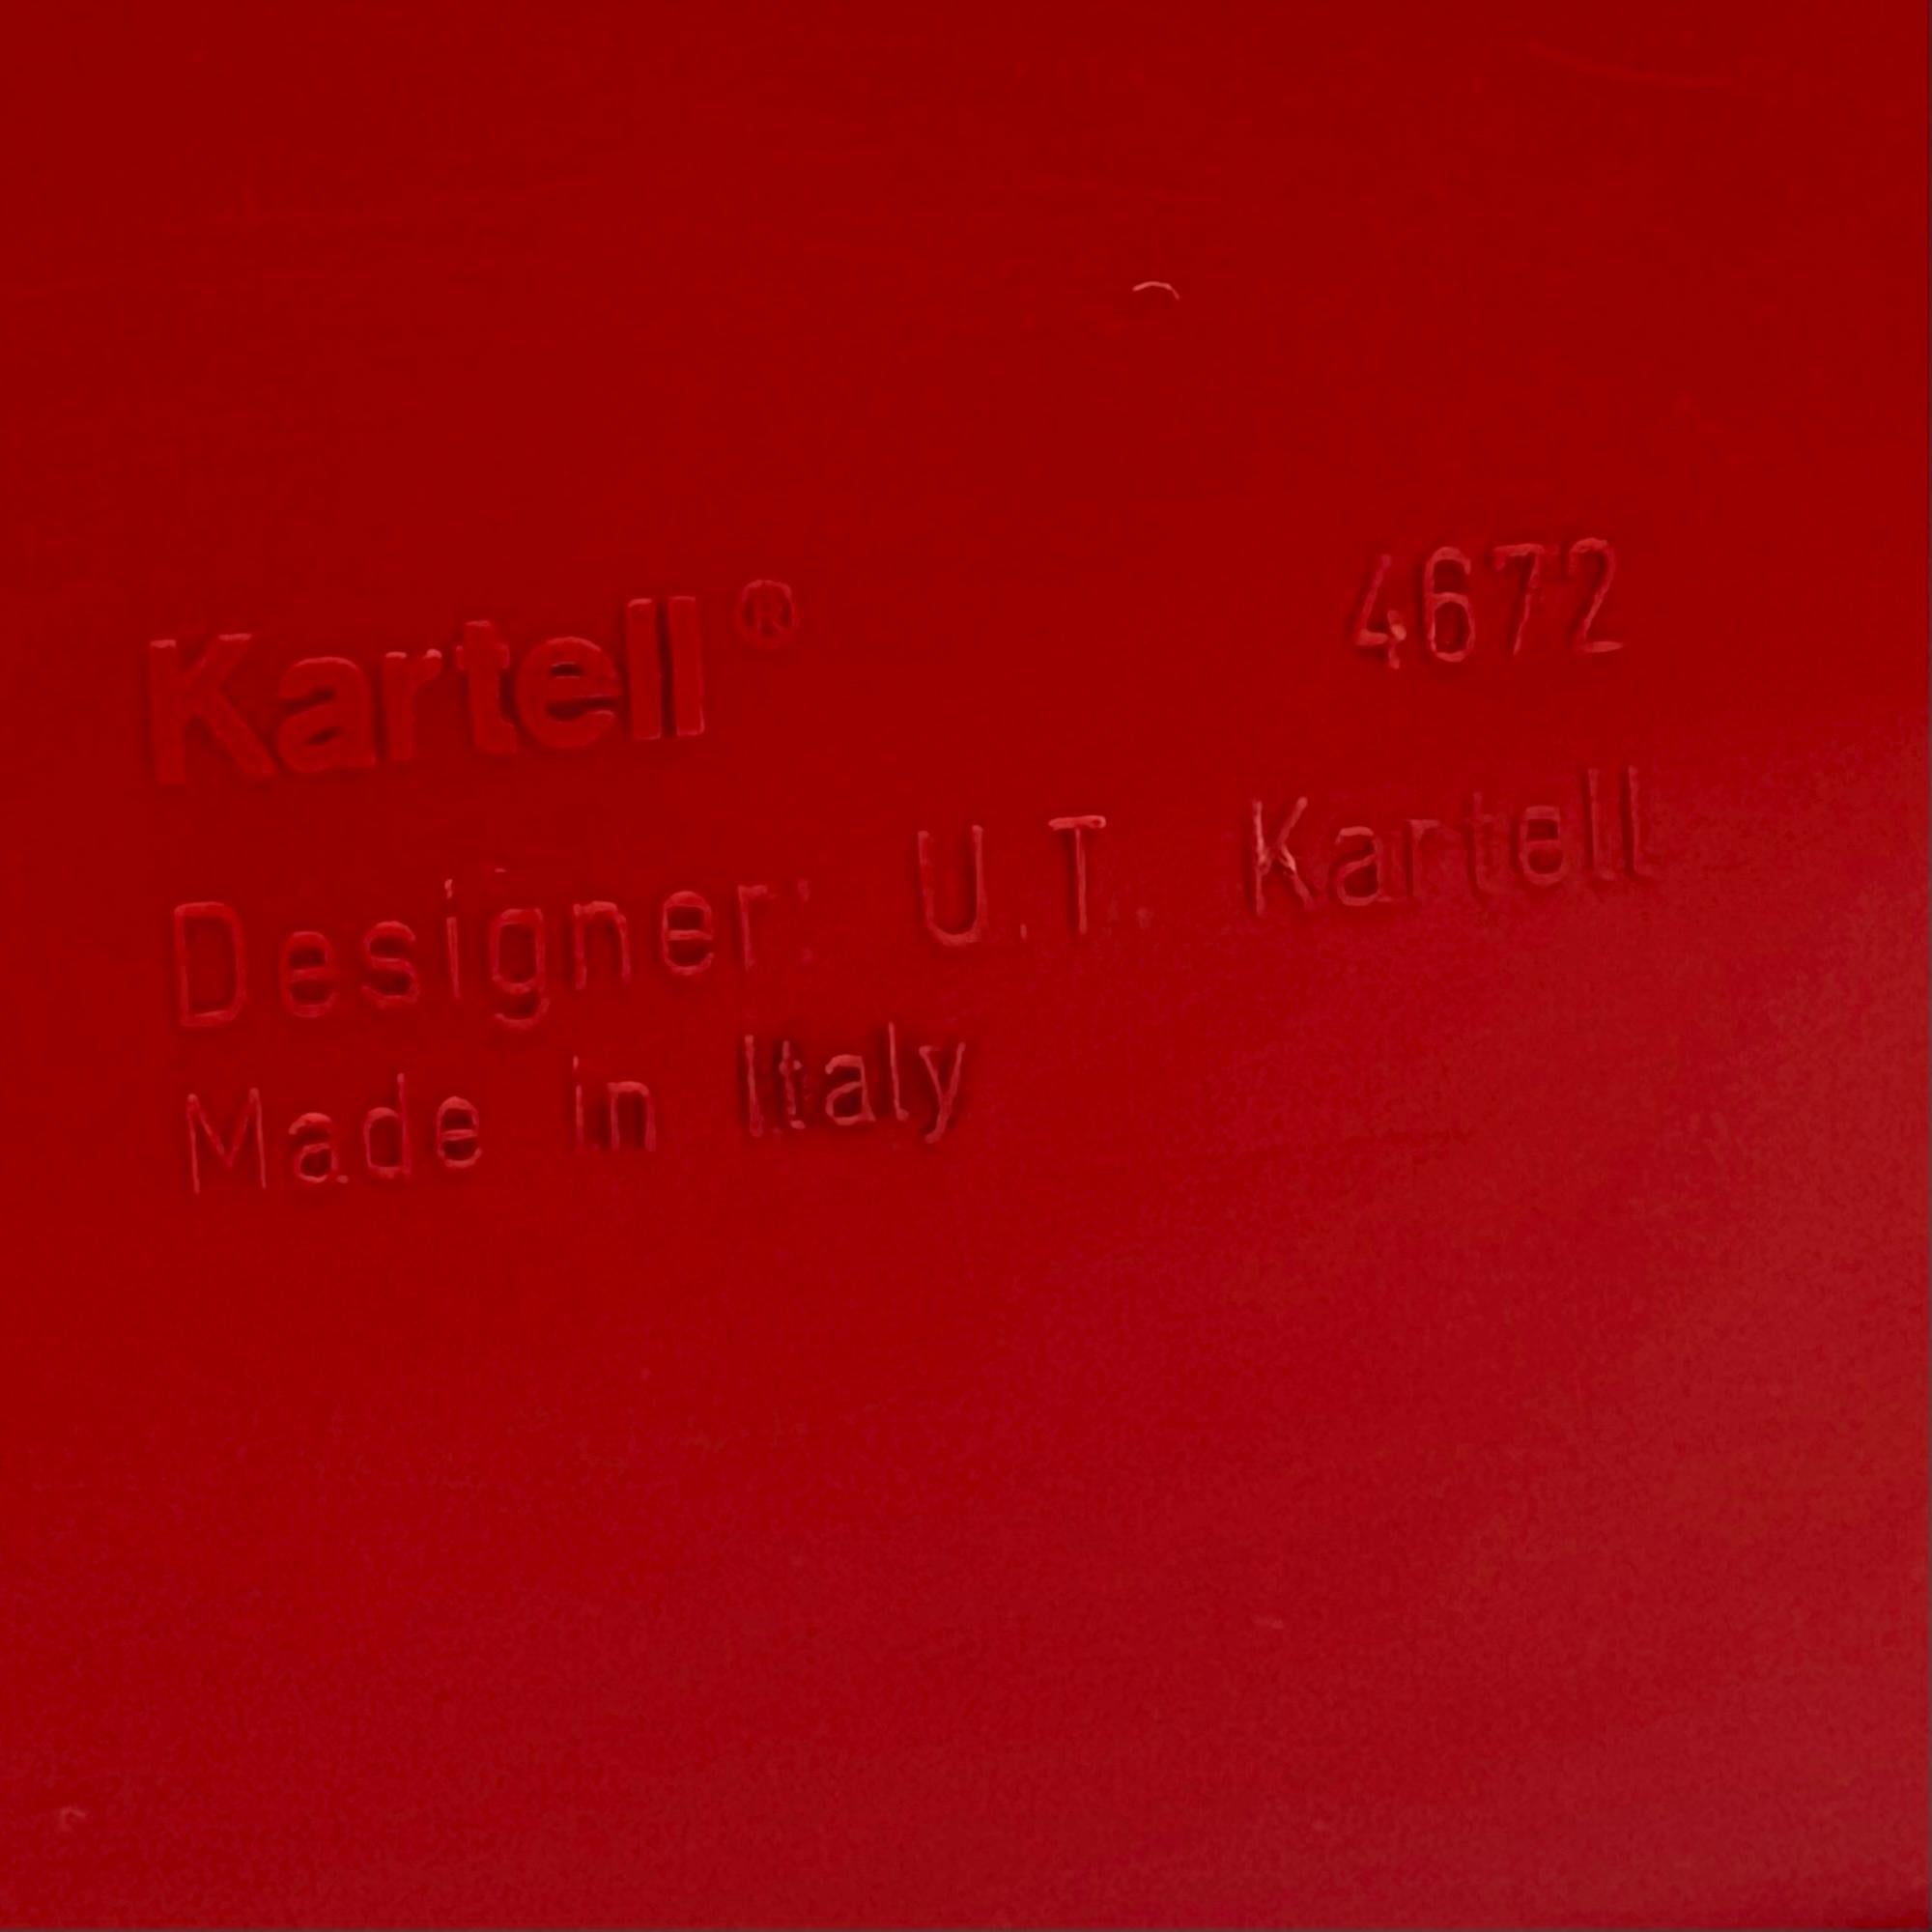 Kartell 4672: Iconic 70s Paper Basket by Ufficio Tecnico-Vibrant Red Glossy  2